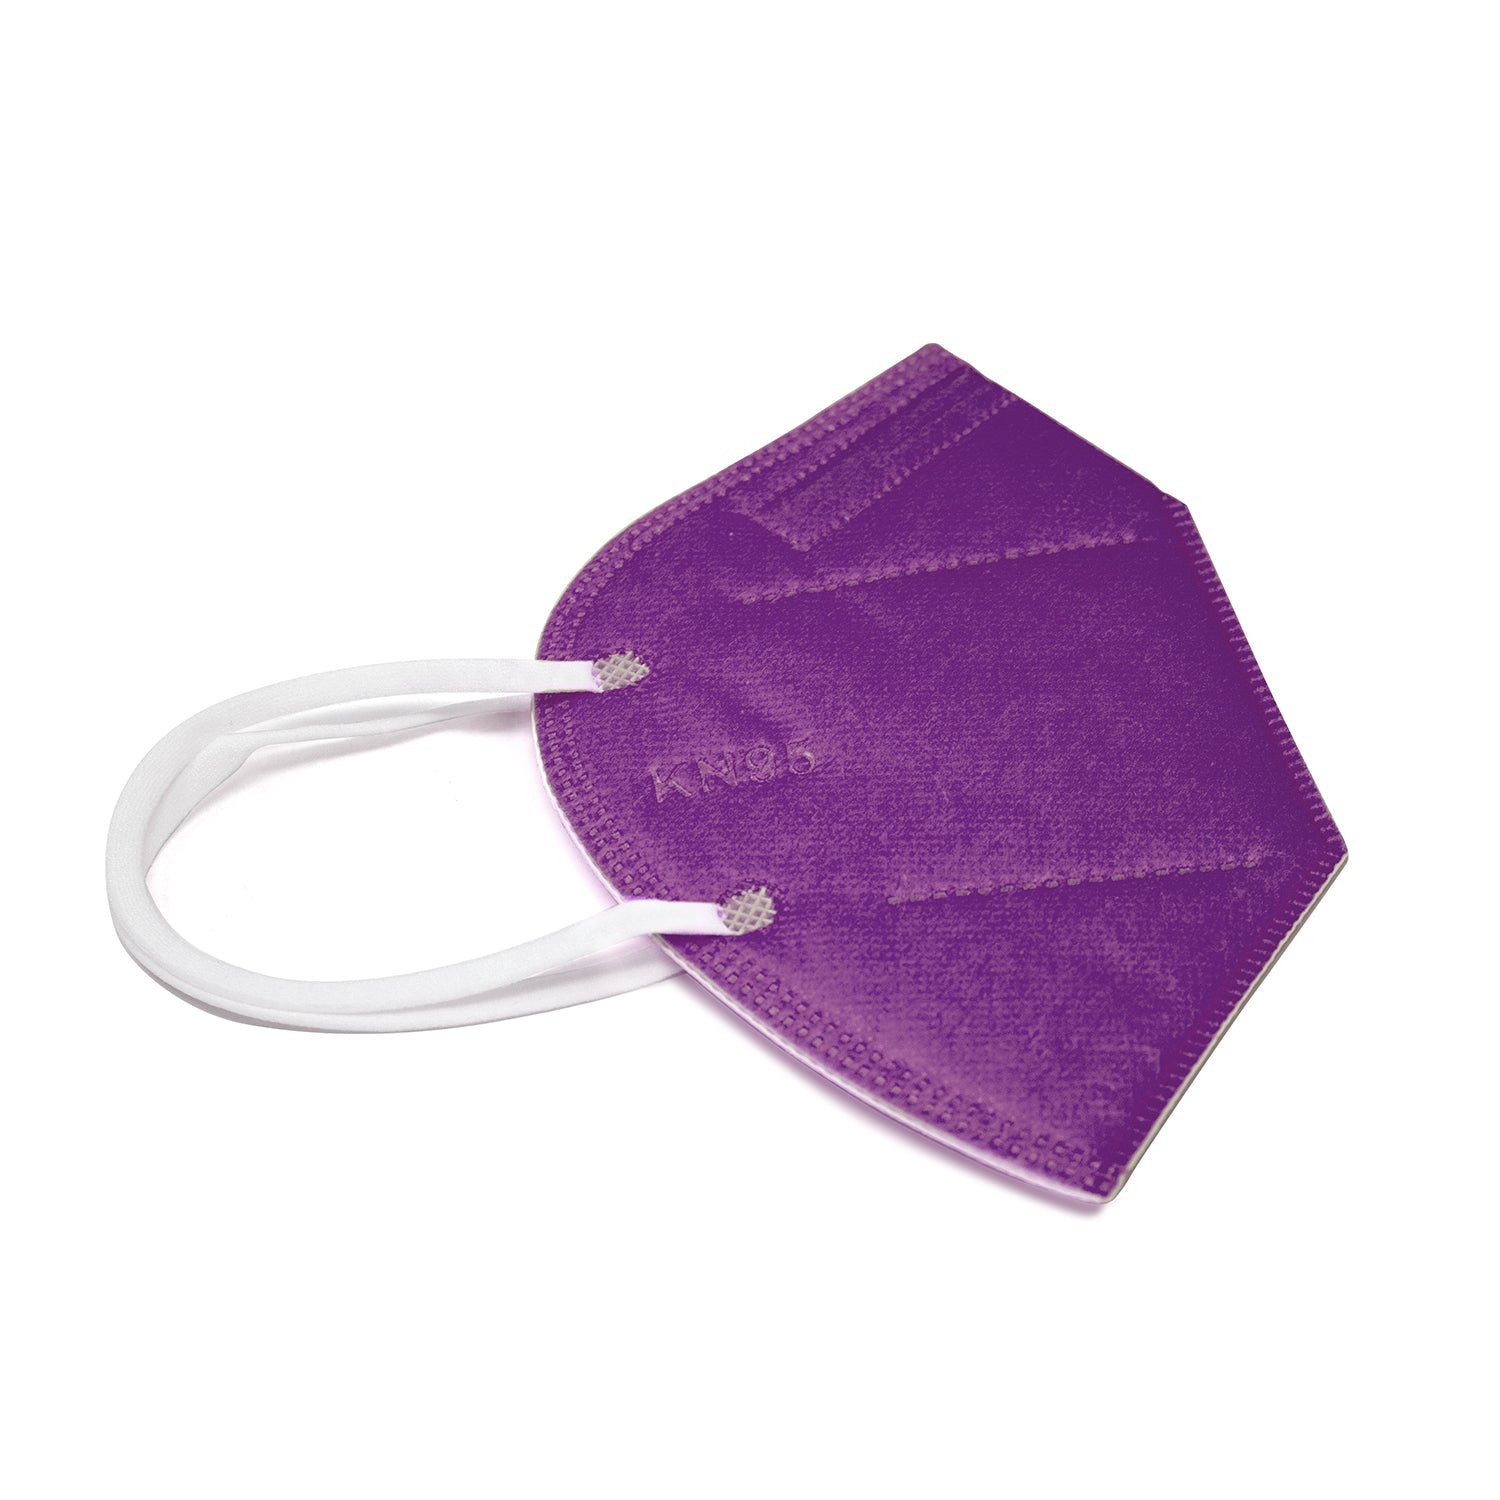 Safe KN95 mask with solid purple design with white straps. Reusable mask, strong elastic straps. 